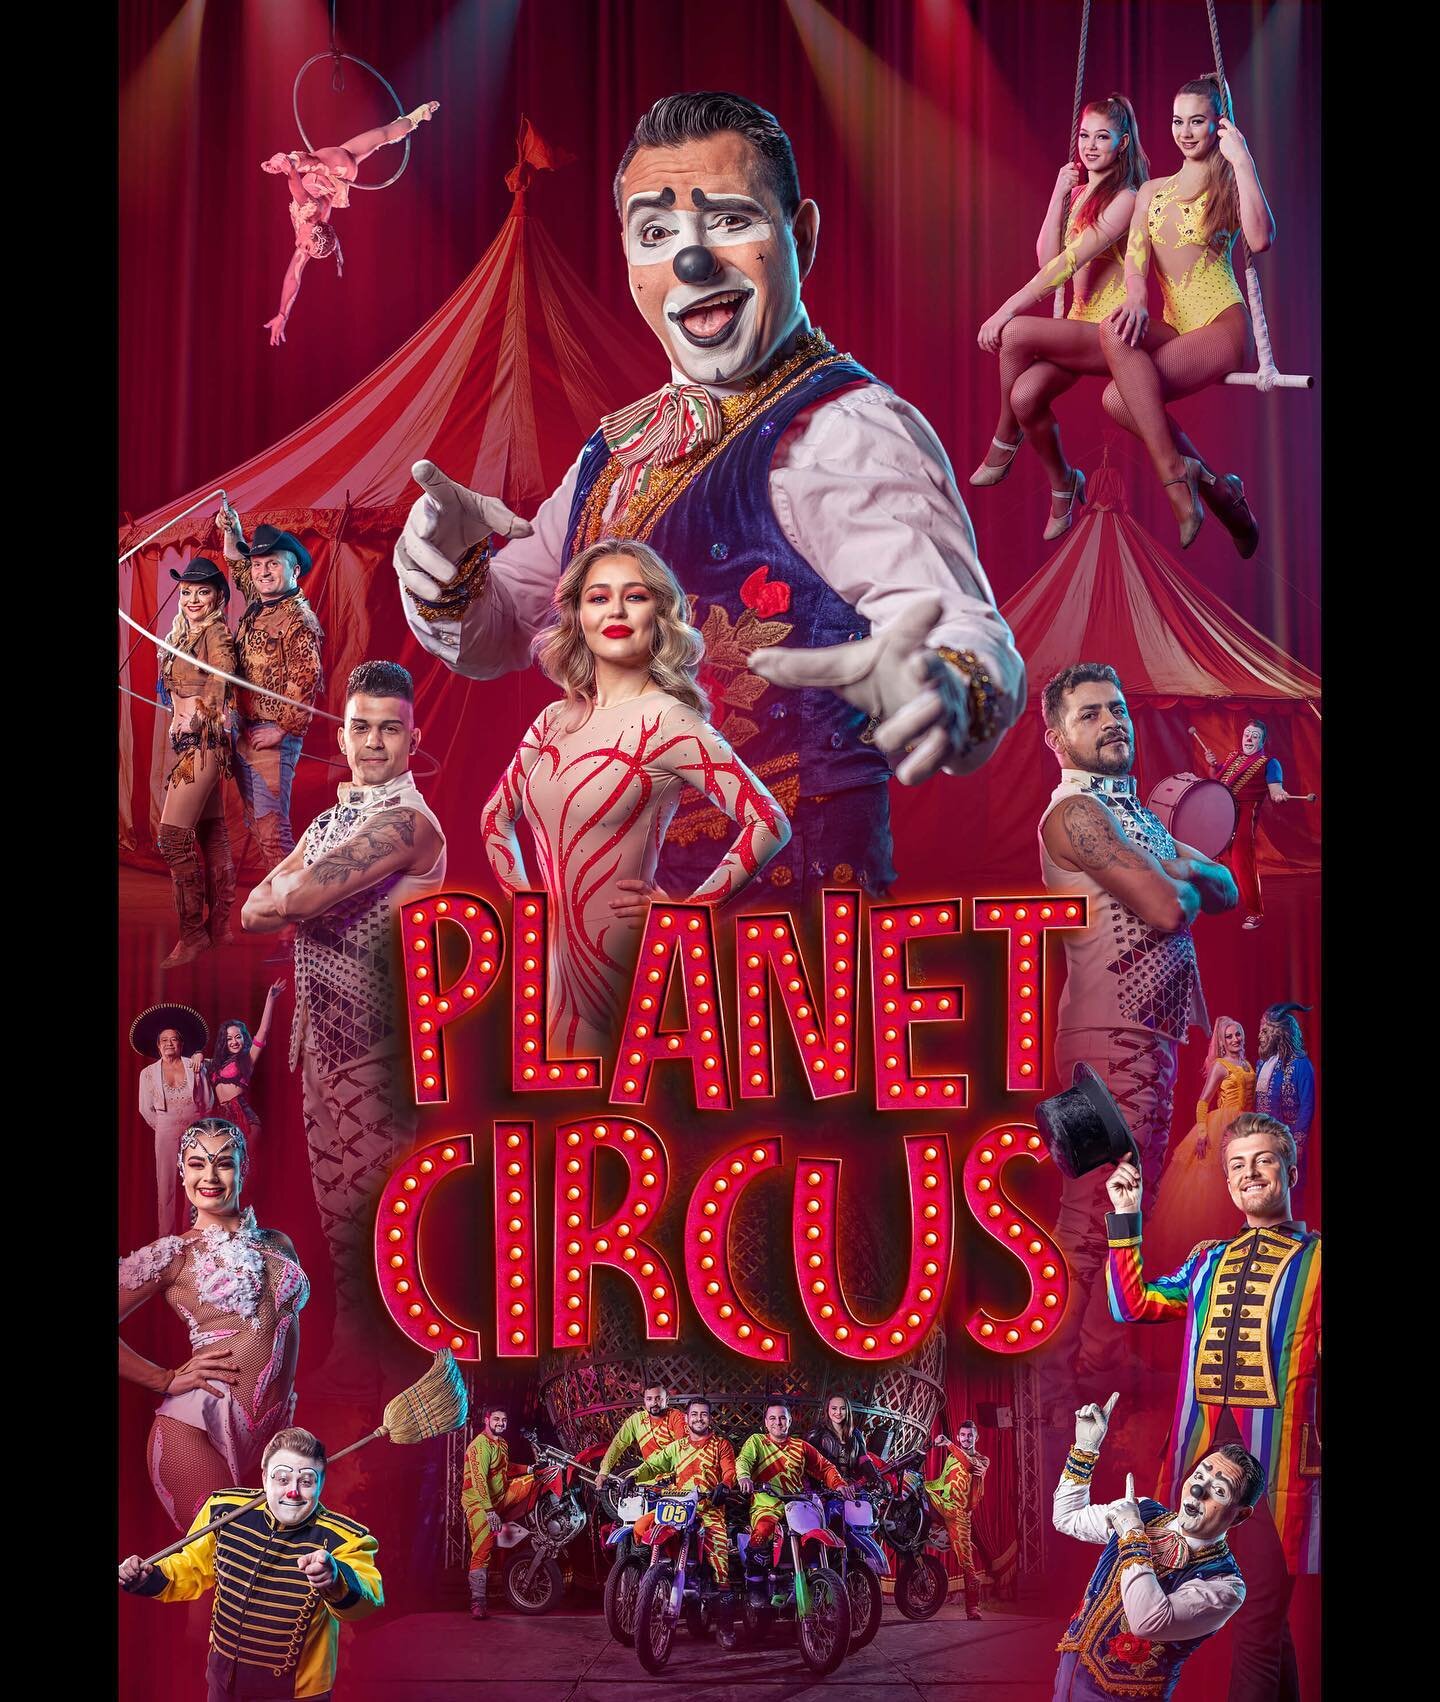 Portrait photography and retouching for Planet Circus. I shot each performer on location in their Big Top tent then created the composite poster in photoshop

#circus #keyartphotography #posterphotography #portraitphotography #keyart #advertisingphot